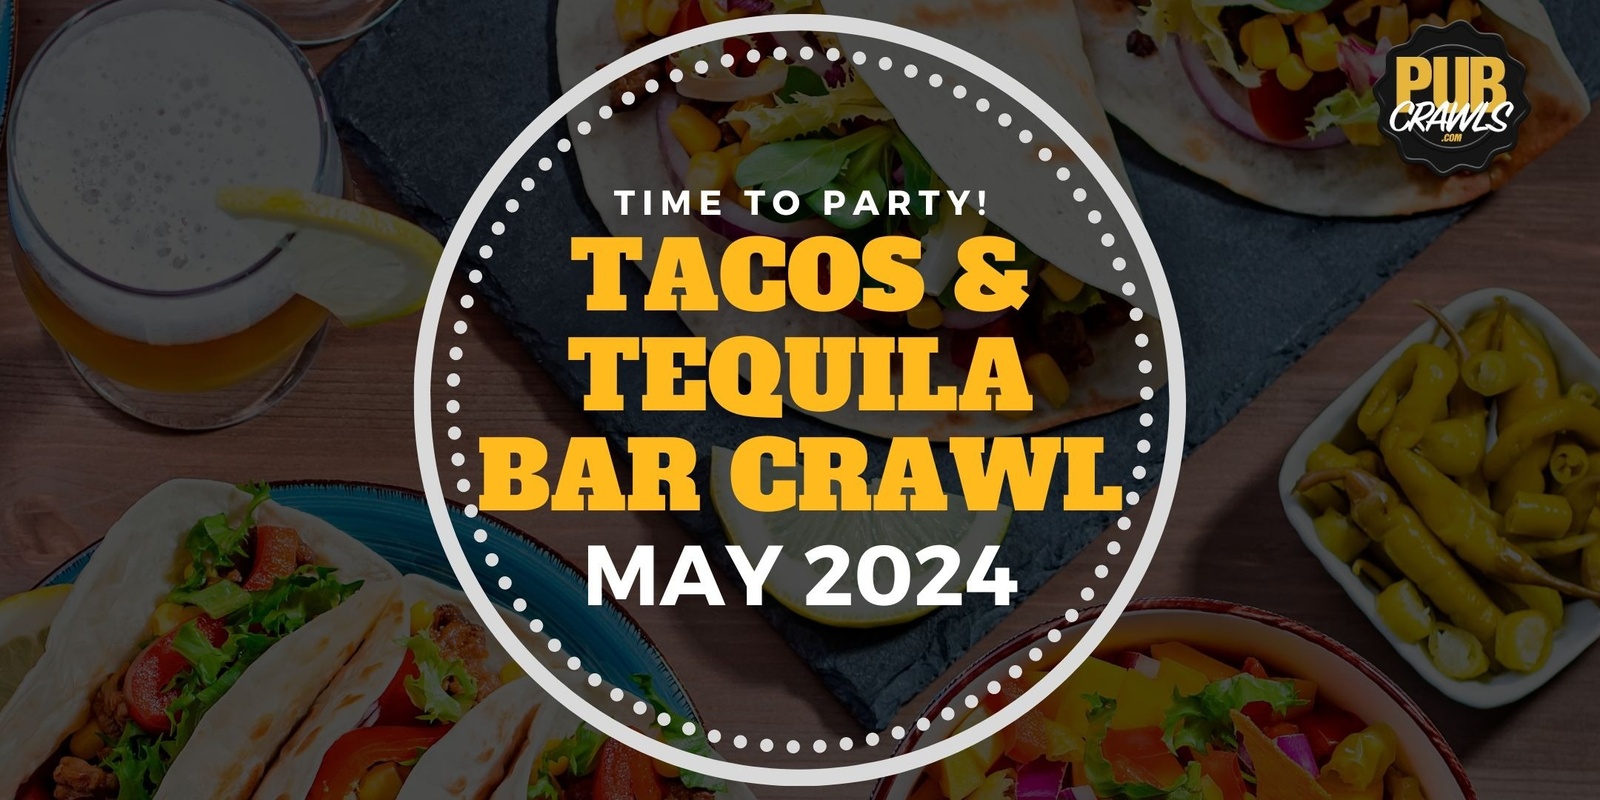 Banner image for Boston Fanueil Hall Tacos and Tequila Bar Crawl